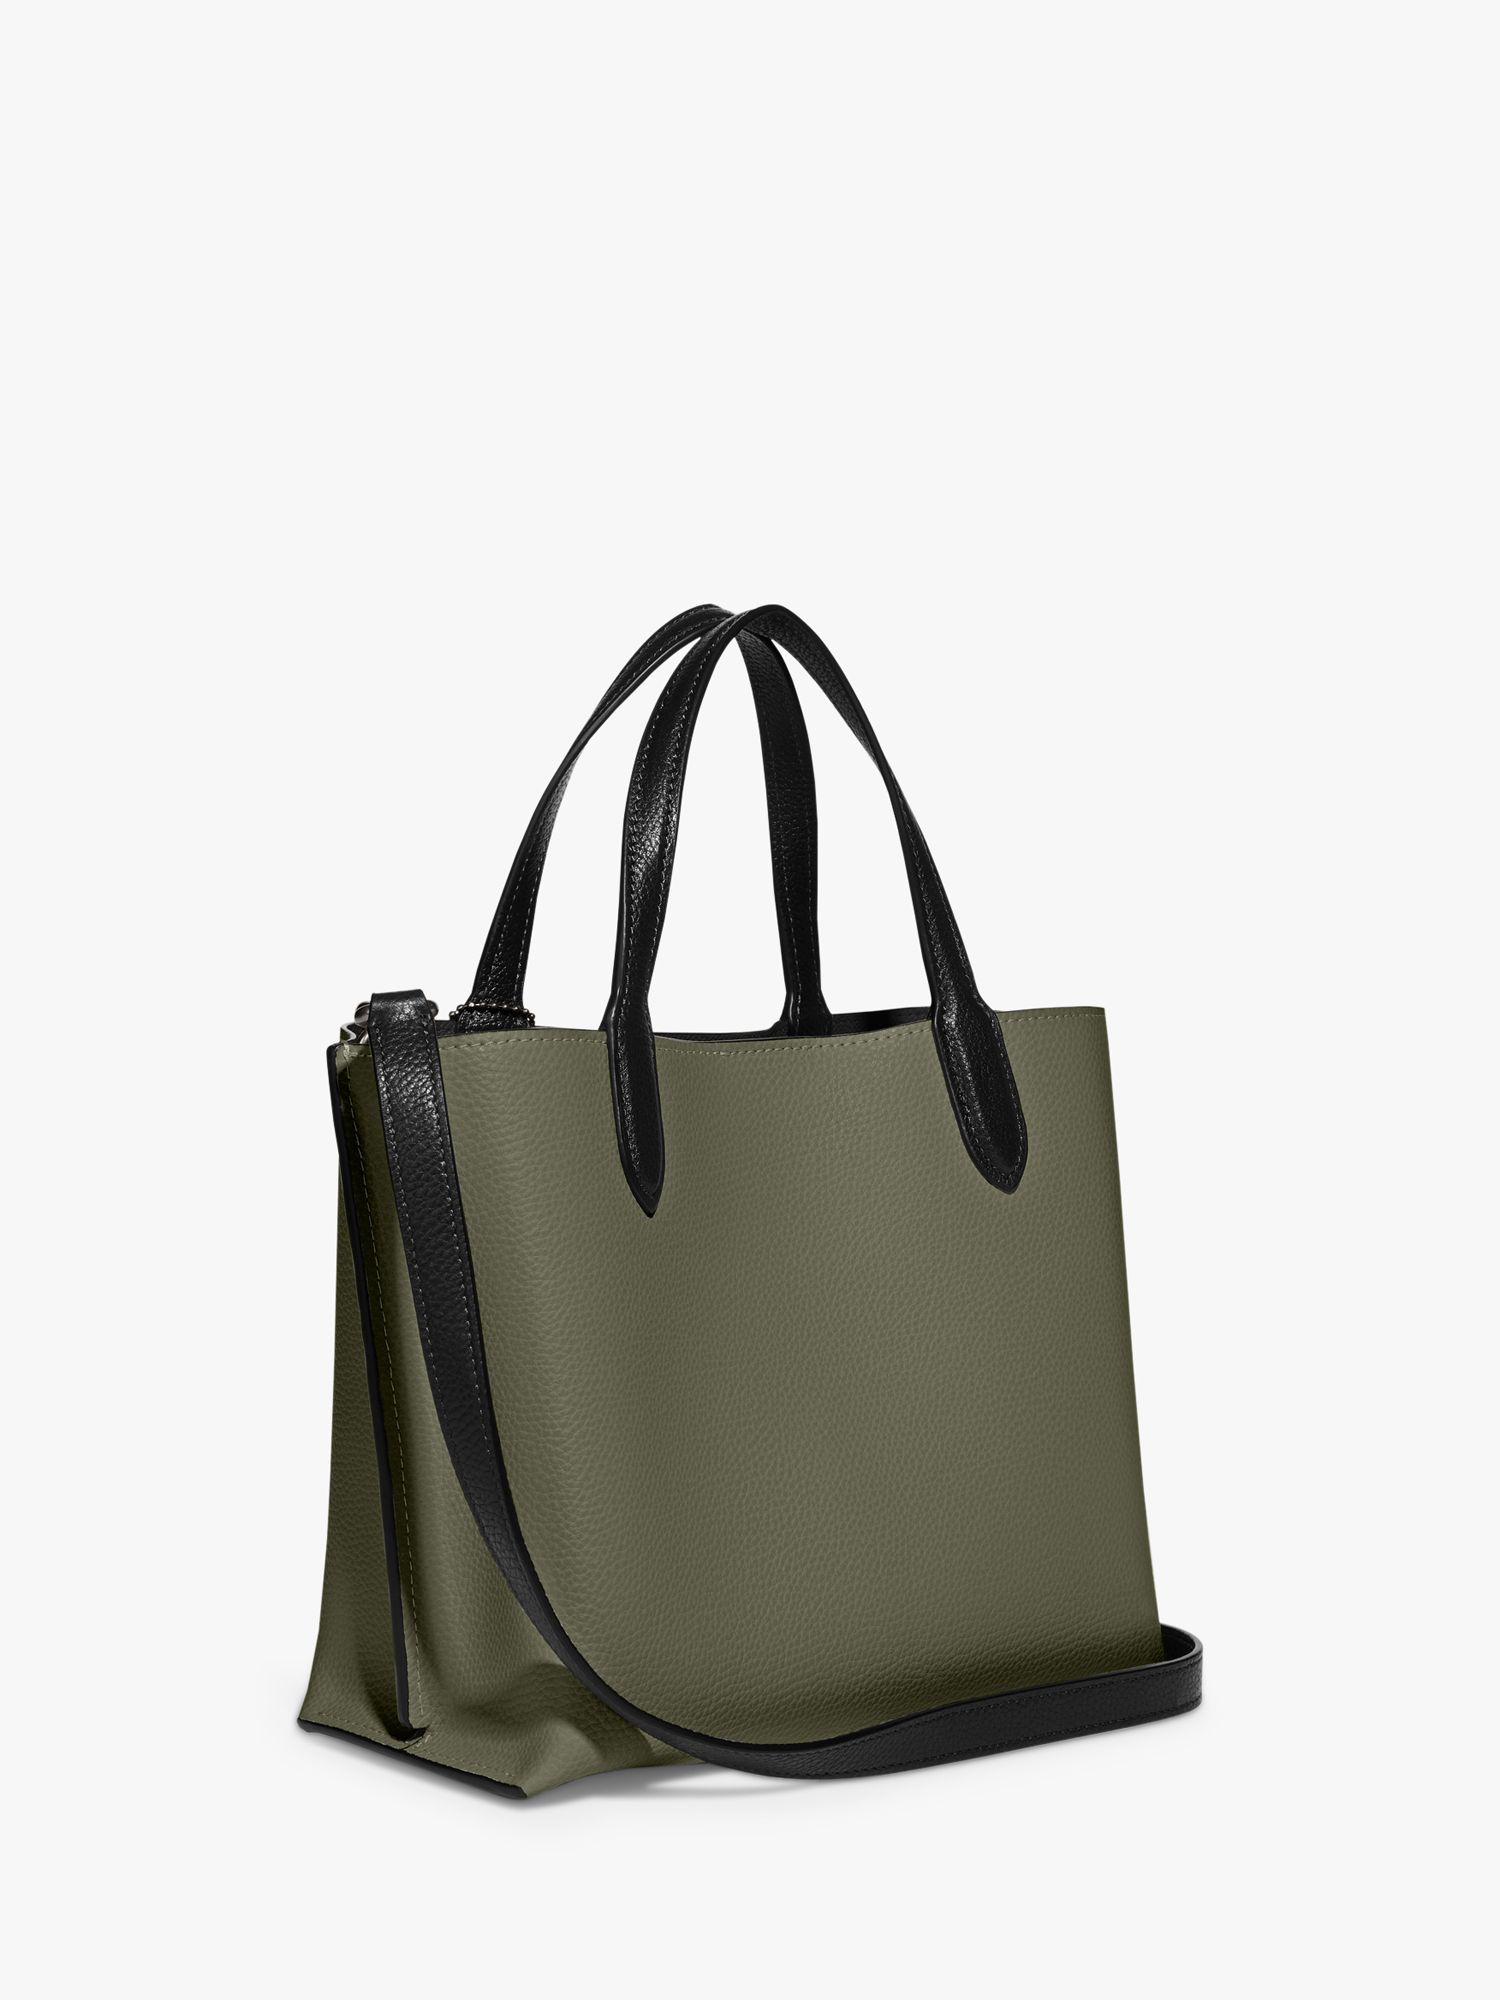 Coach Willow 24 Leather Shoulder Bag, Army Green at John Lewis & Partners